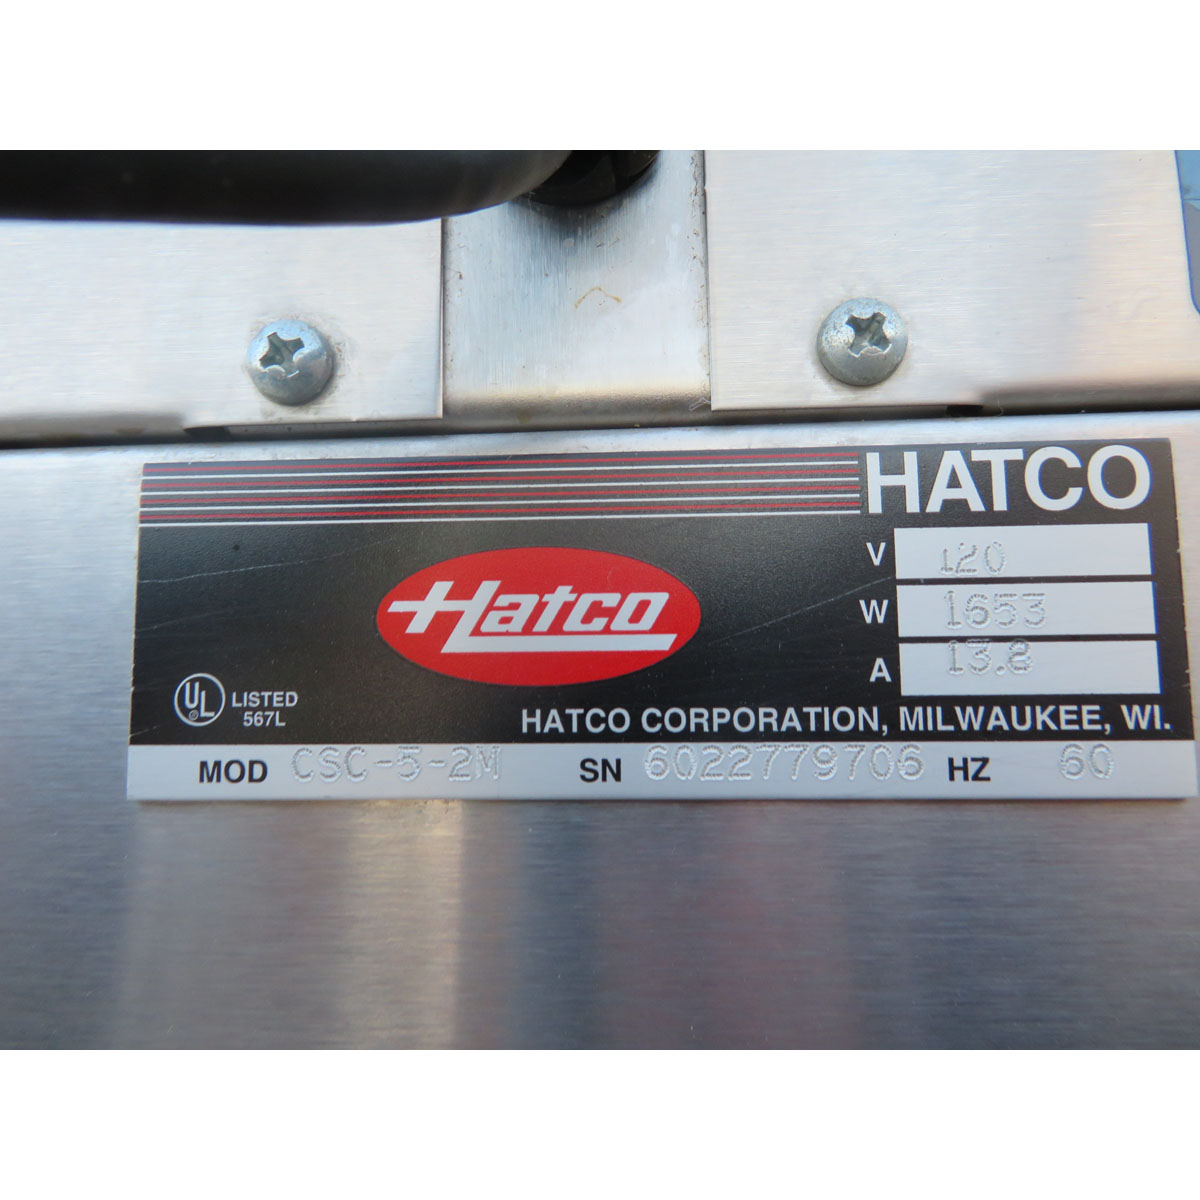 Hatco CSC-5-2M Cook & Hold Oven, Used Very Good Condition image 4